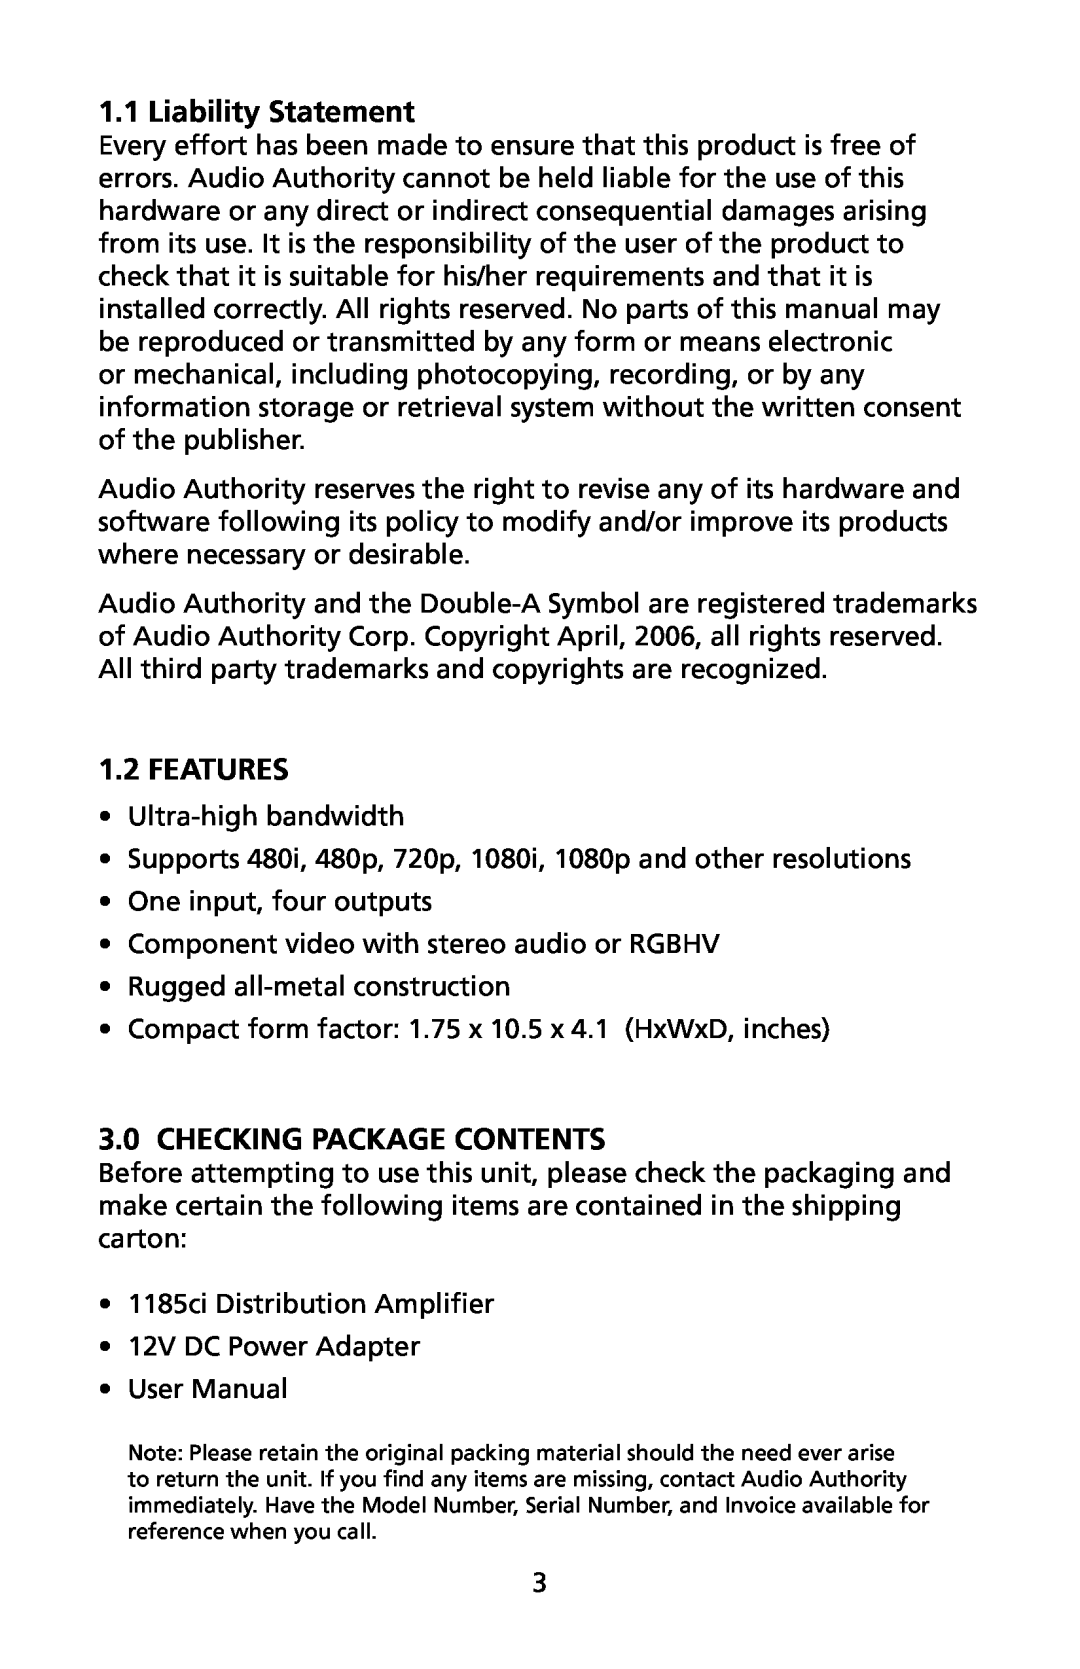 Audio Authority 1185ci user manual Liability Statement, Features, Checking Package Contents 